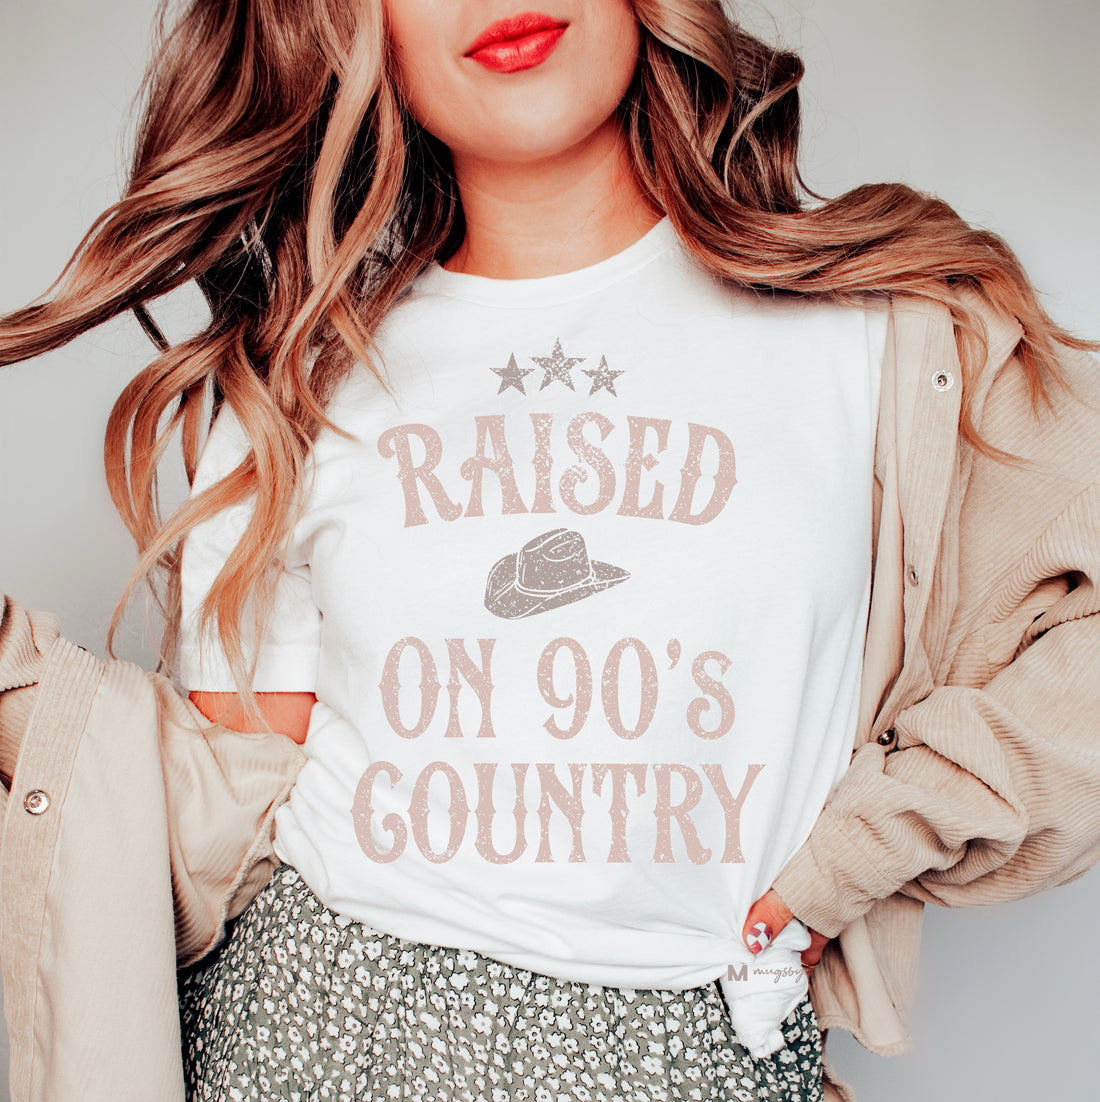 Raised on 90s Country Graphic Shirt